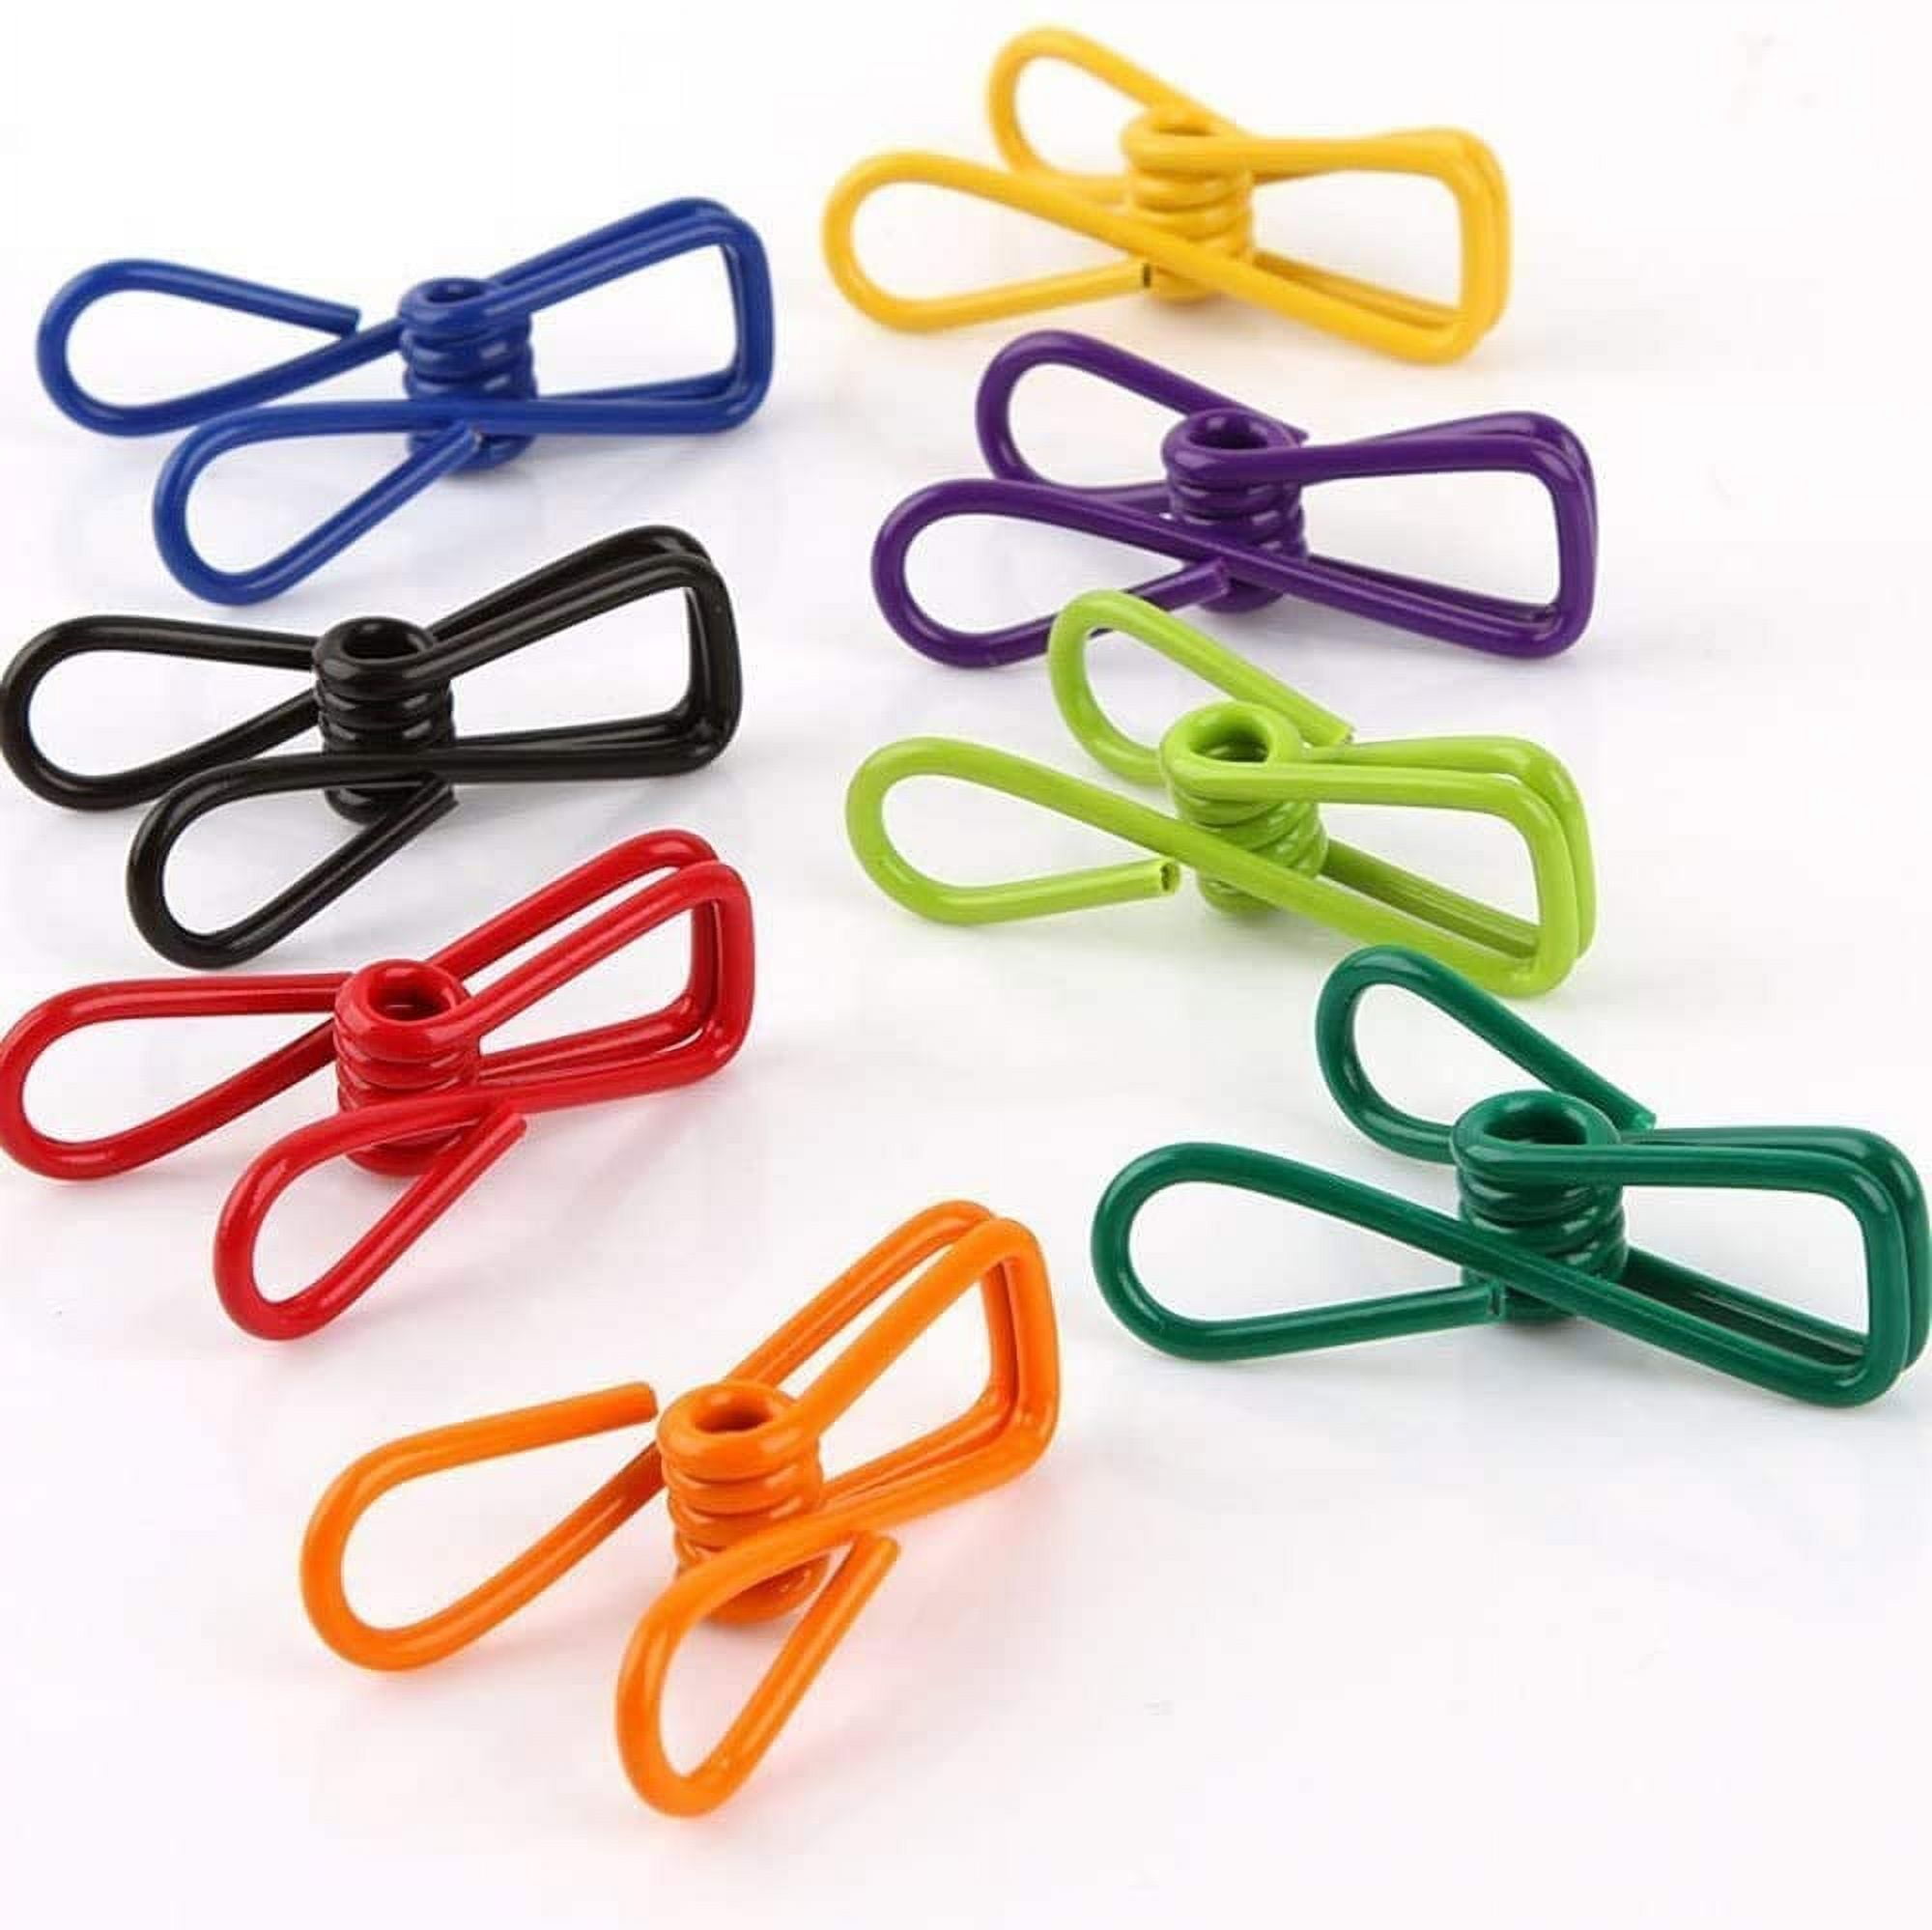 10 Pack Large Bulldog Clips/metal Hinge Clip File Paper Clamps For